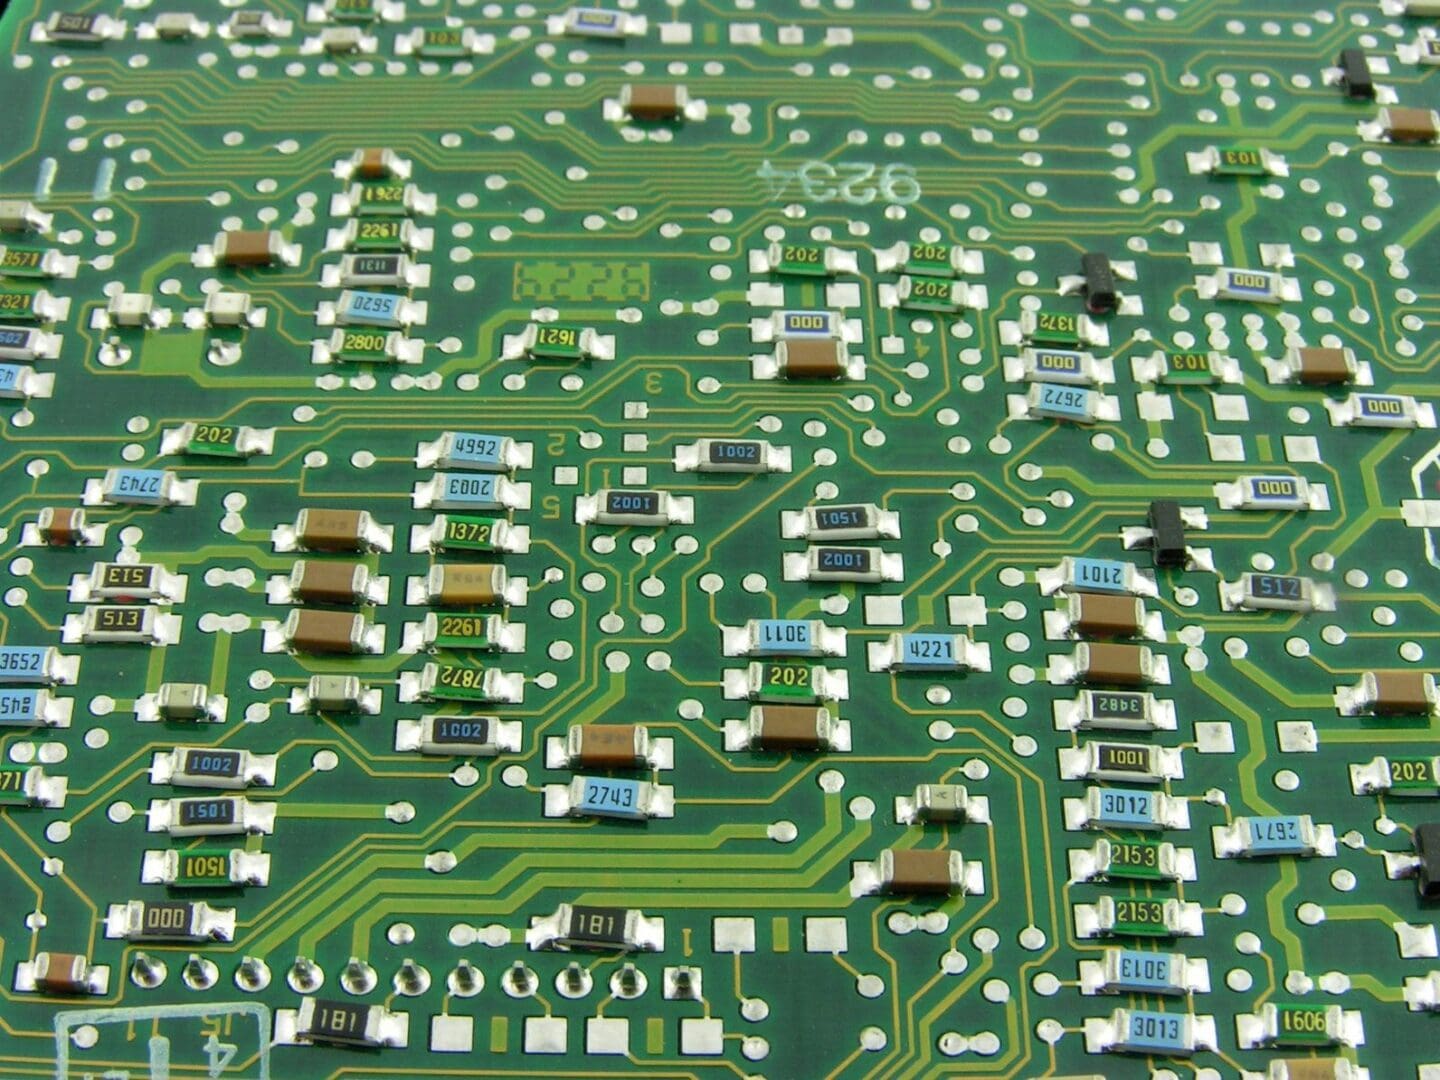 A close up of the circuit board with many houses